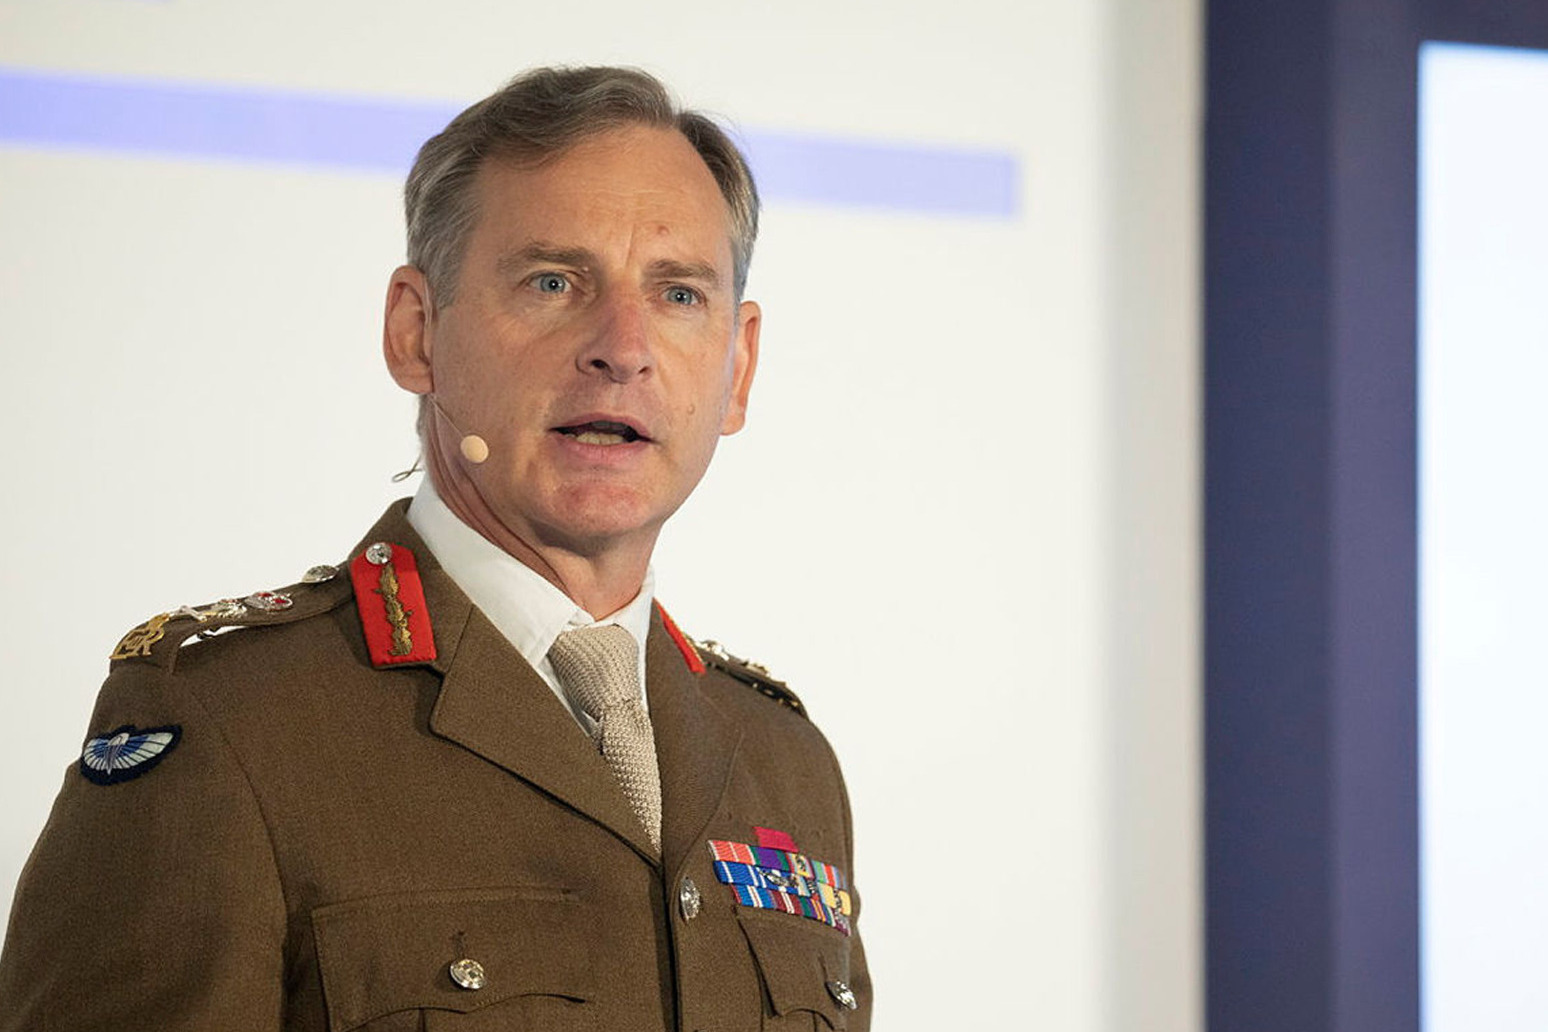 Head of Army ‘appalled’ at claims British soldiers were involved in Kenya murder 